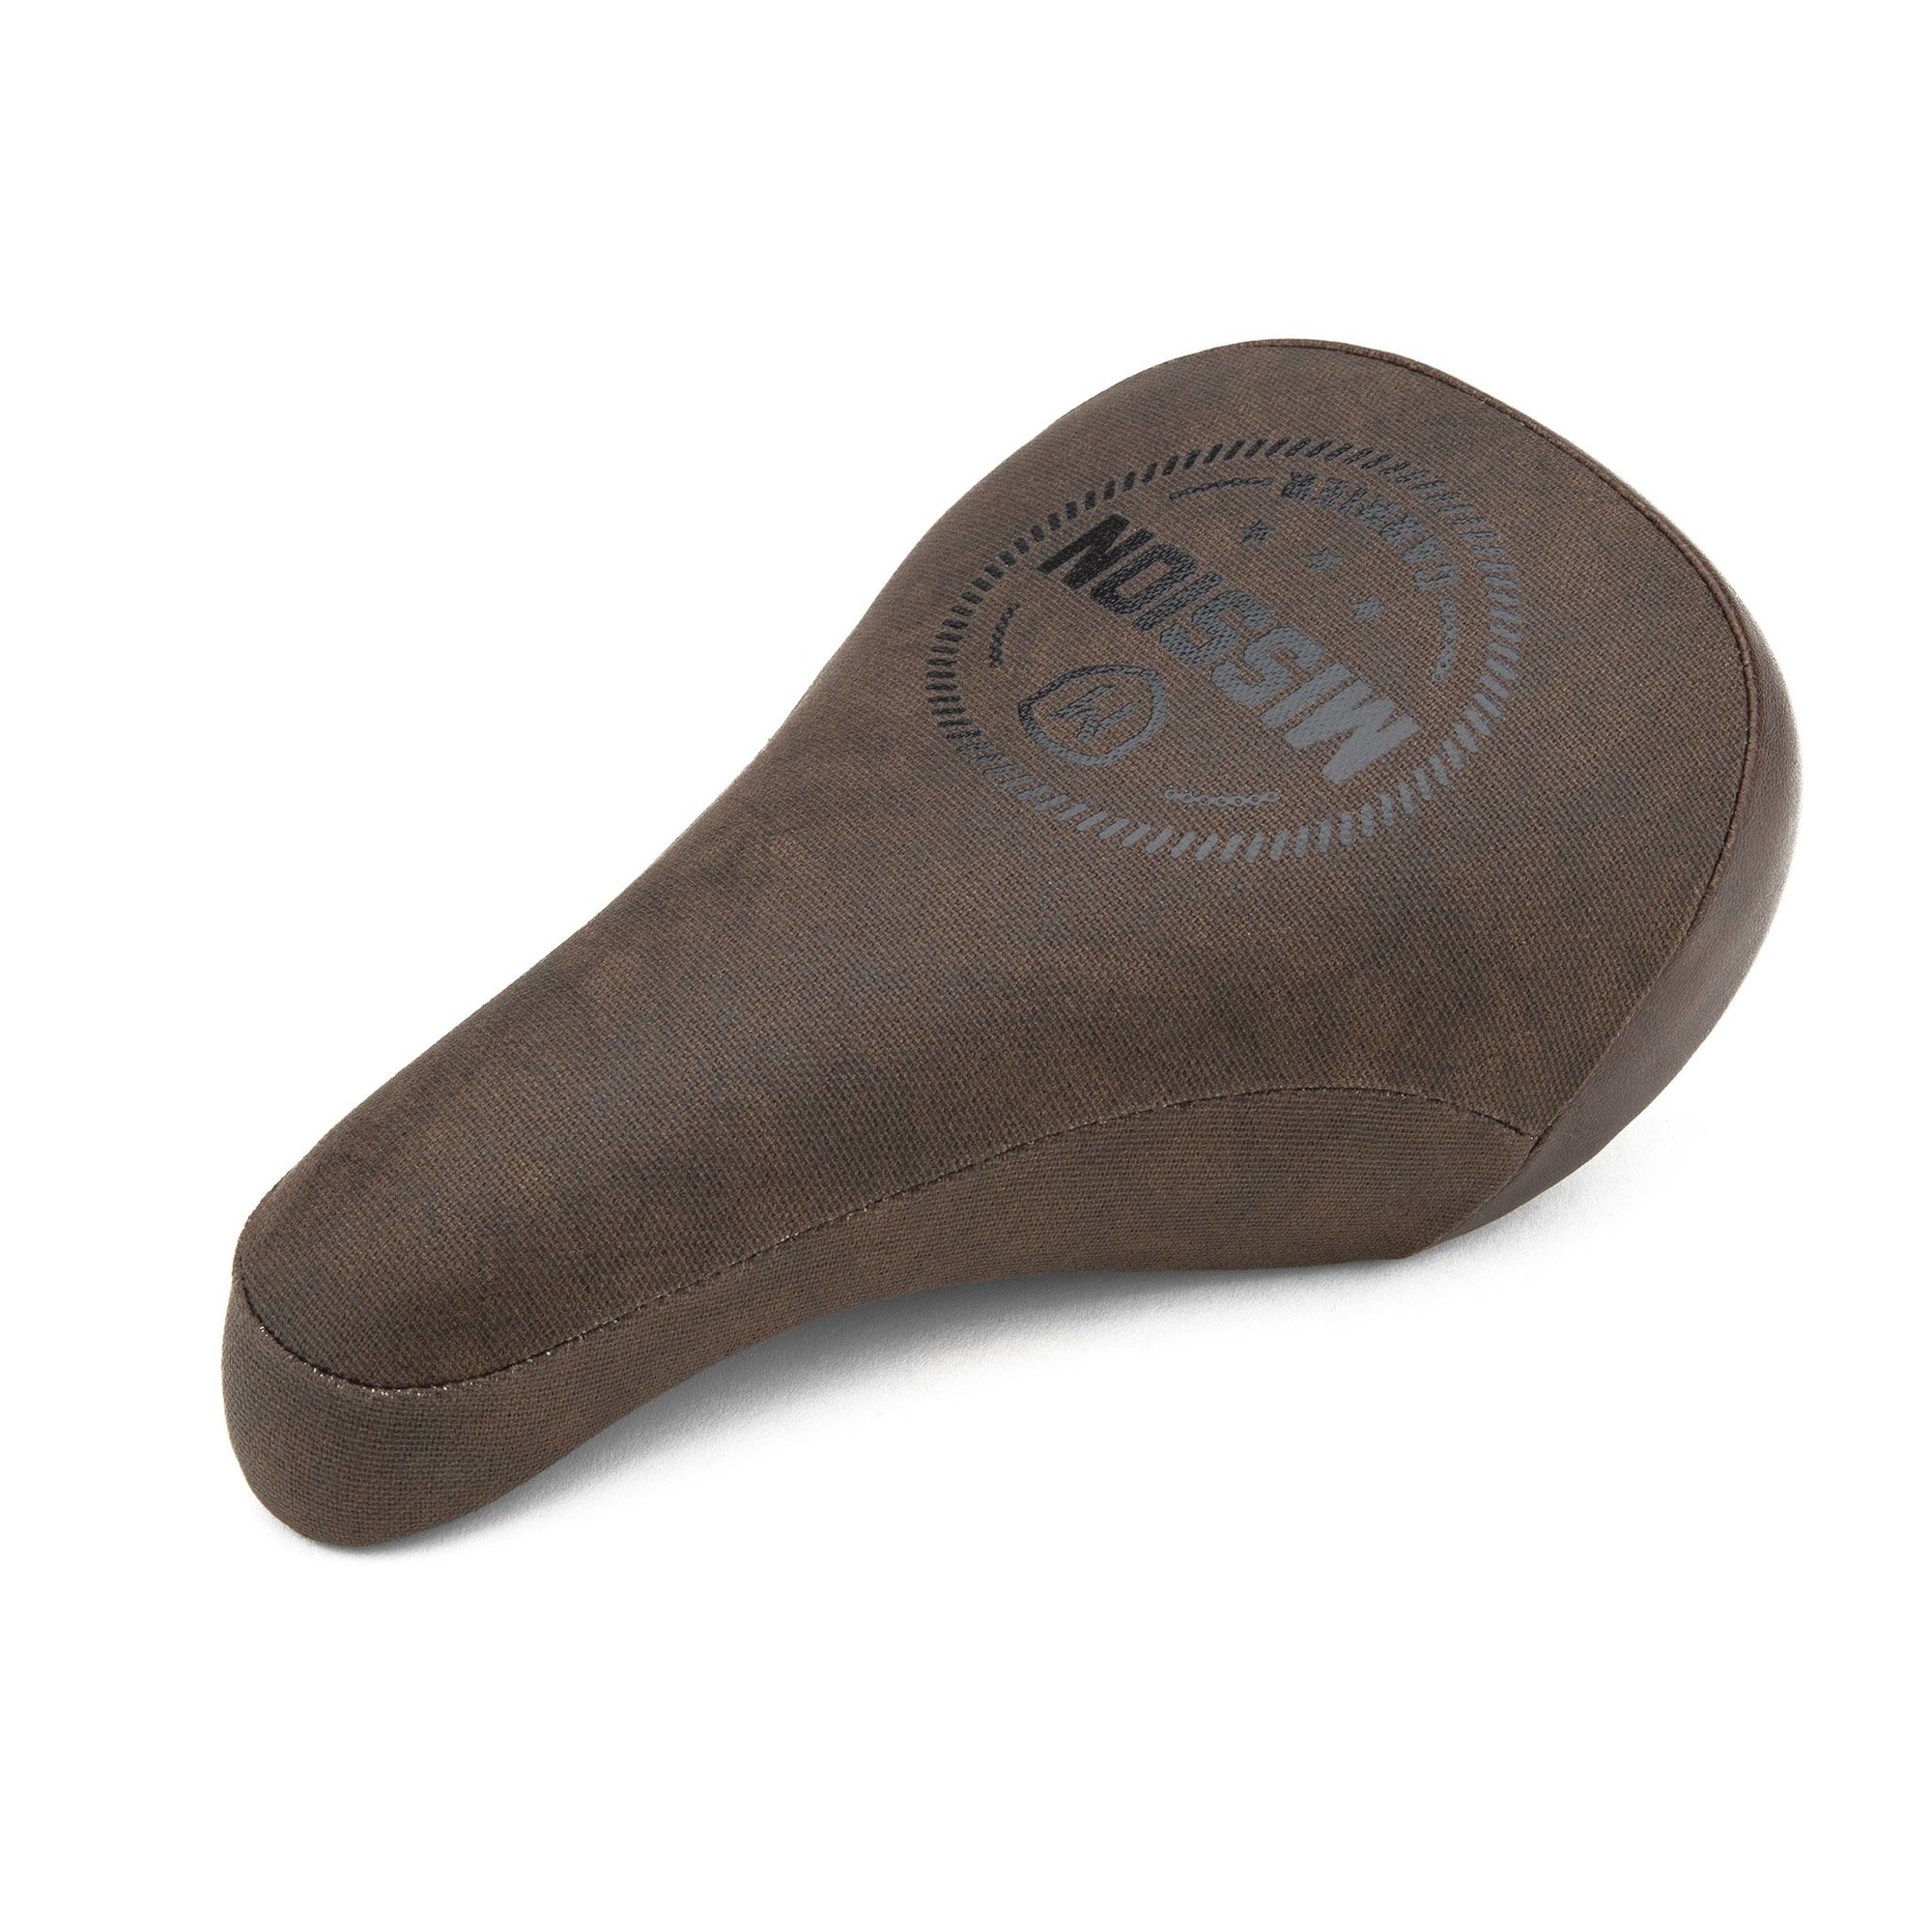 Mission Carrier Stealth Pivotal Padded BMX Seat - Brown